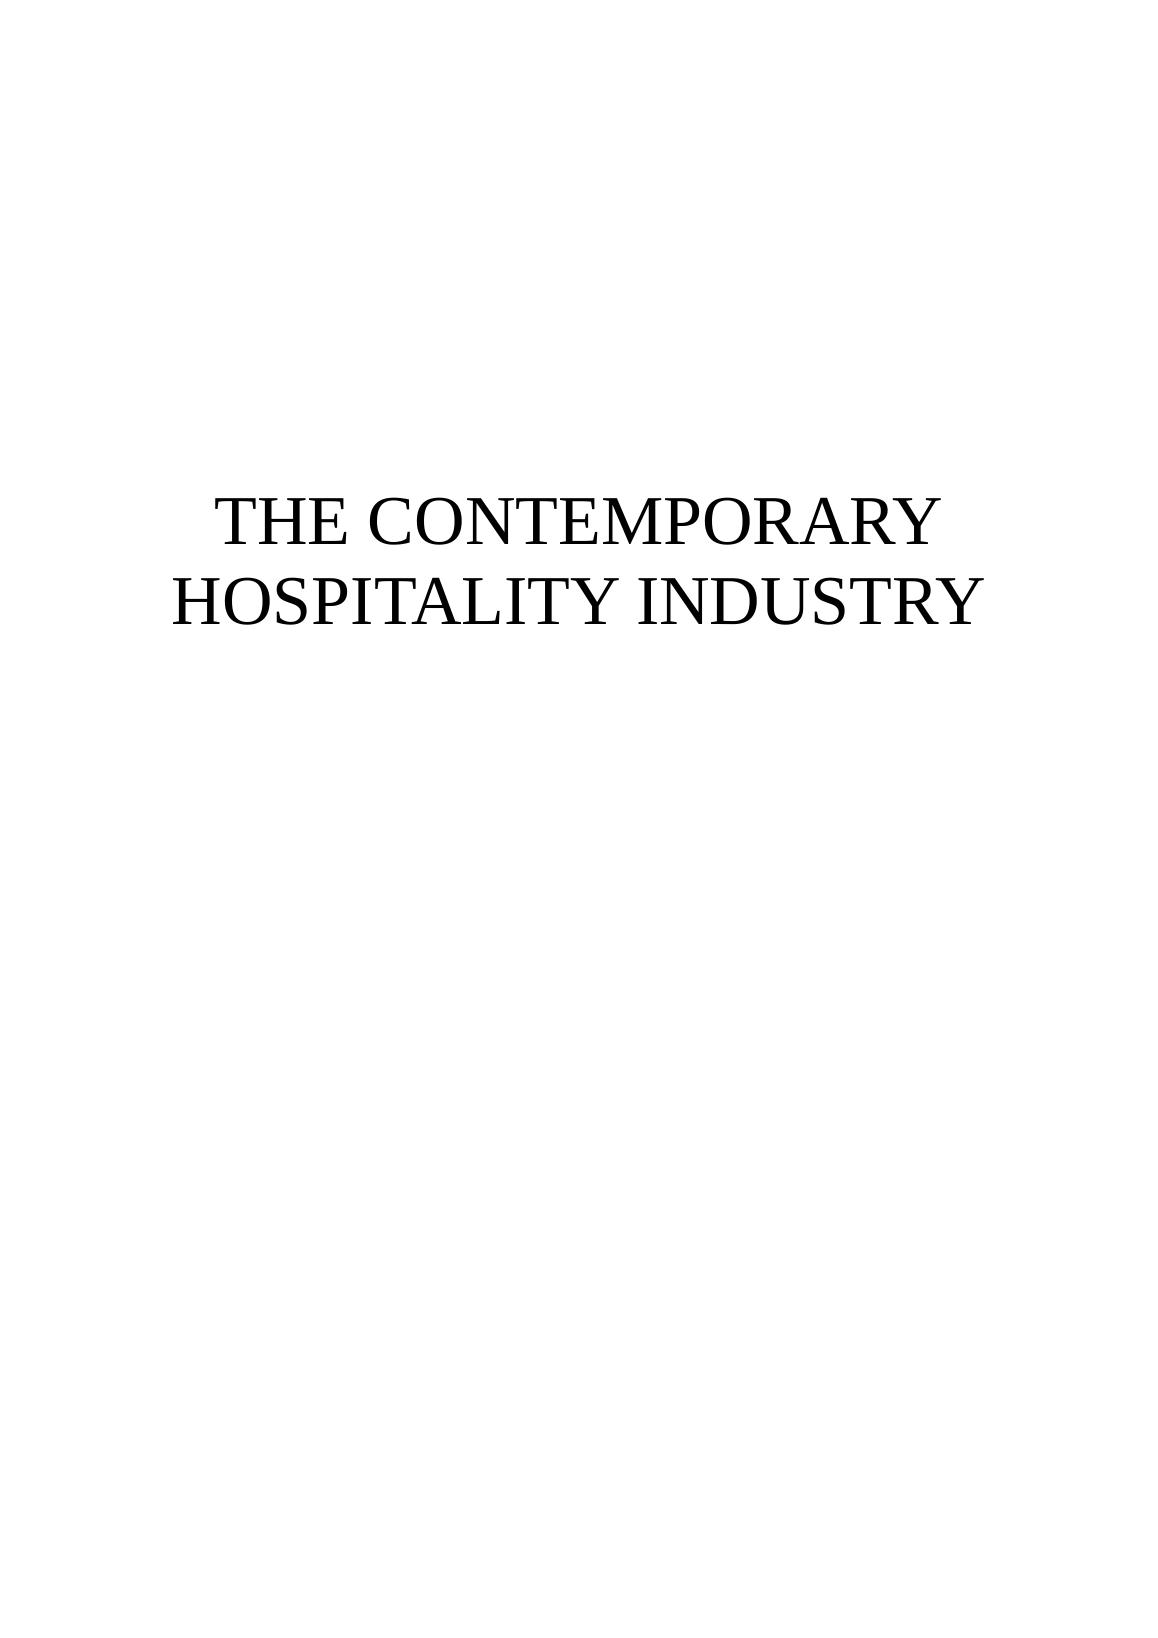 The Contemporary Hospitality Industry PDF_1